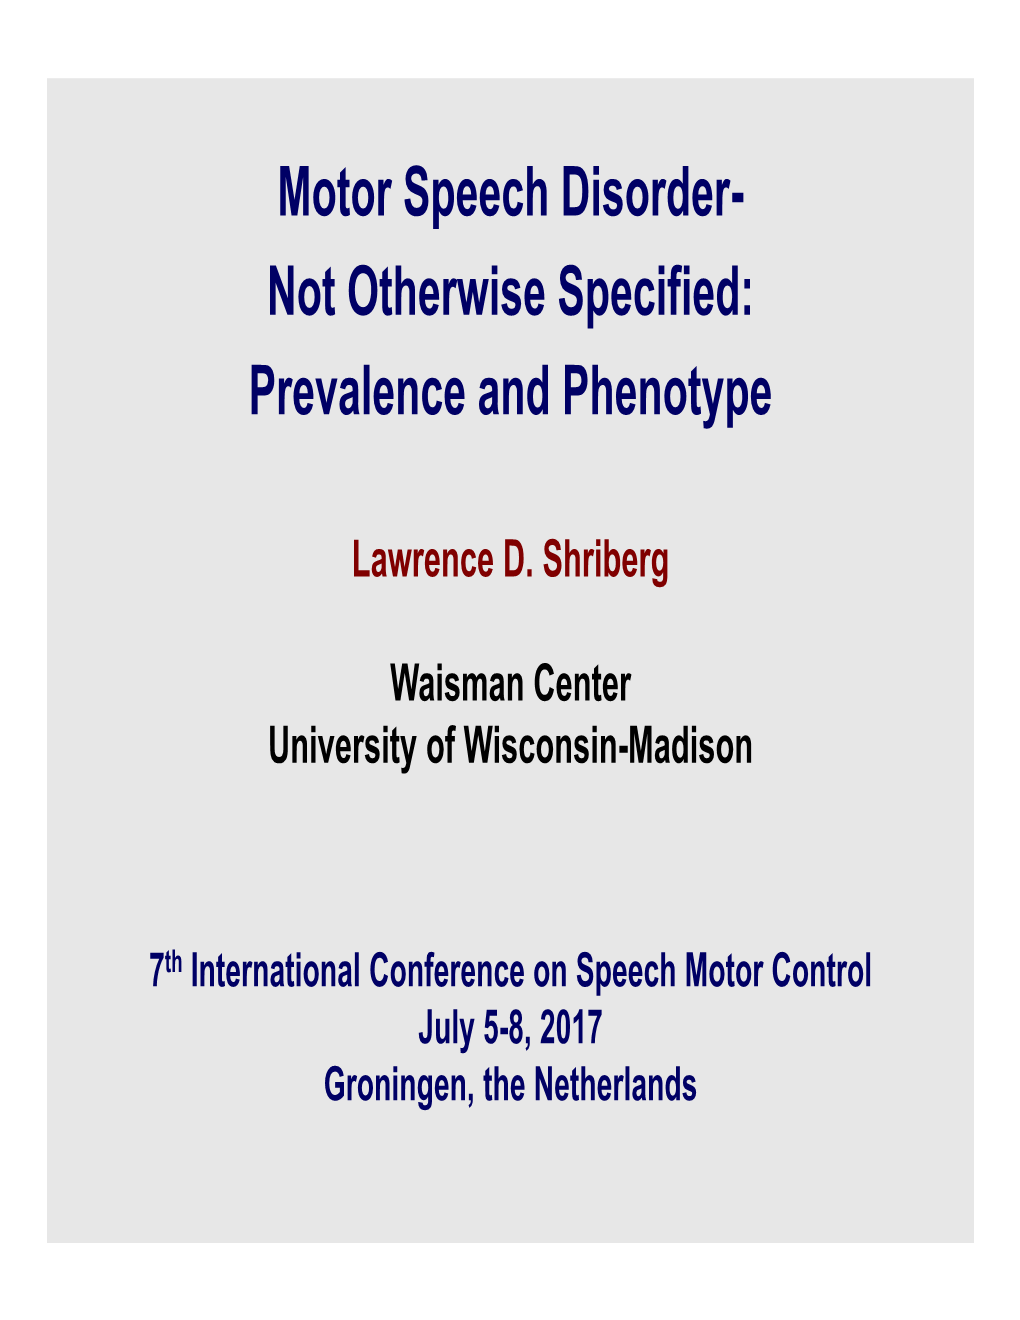 Motor Speech Disorder- Not Otherwise Specified: Prevalence and Phenotype